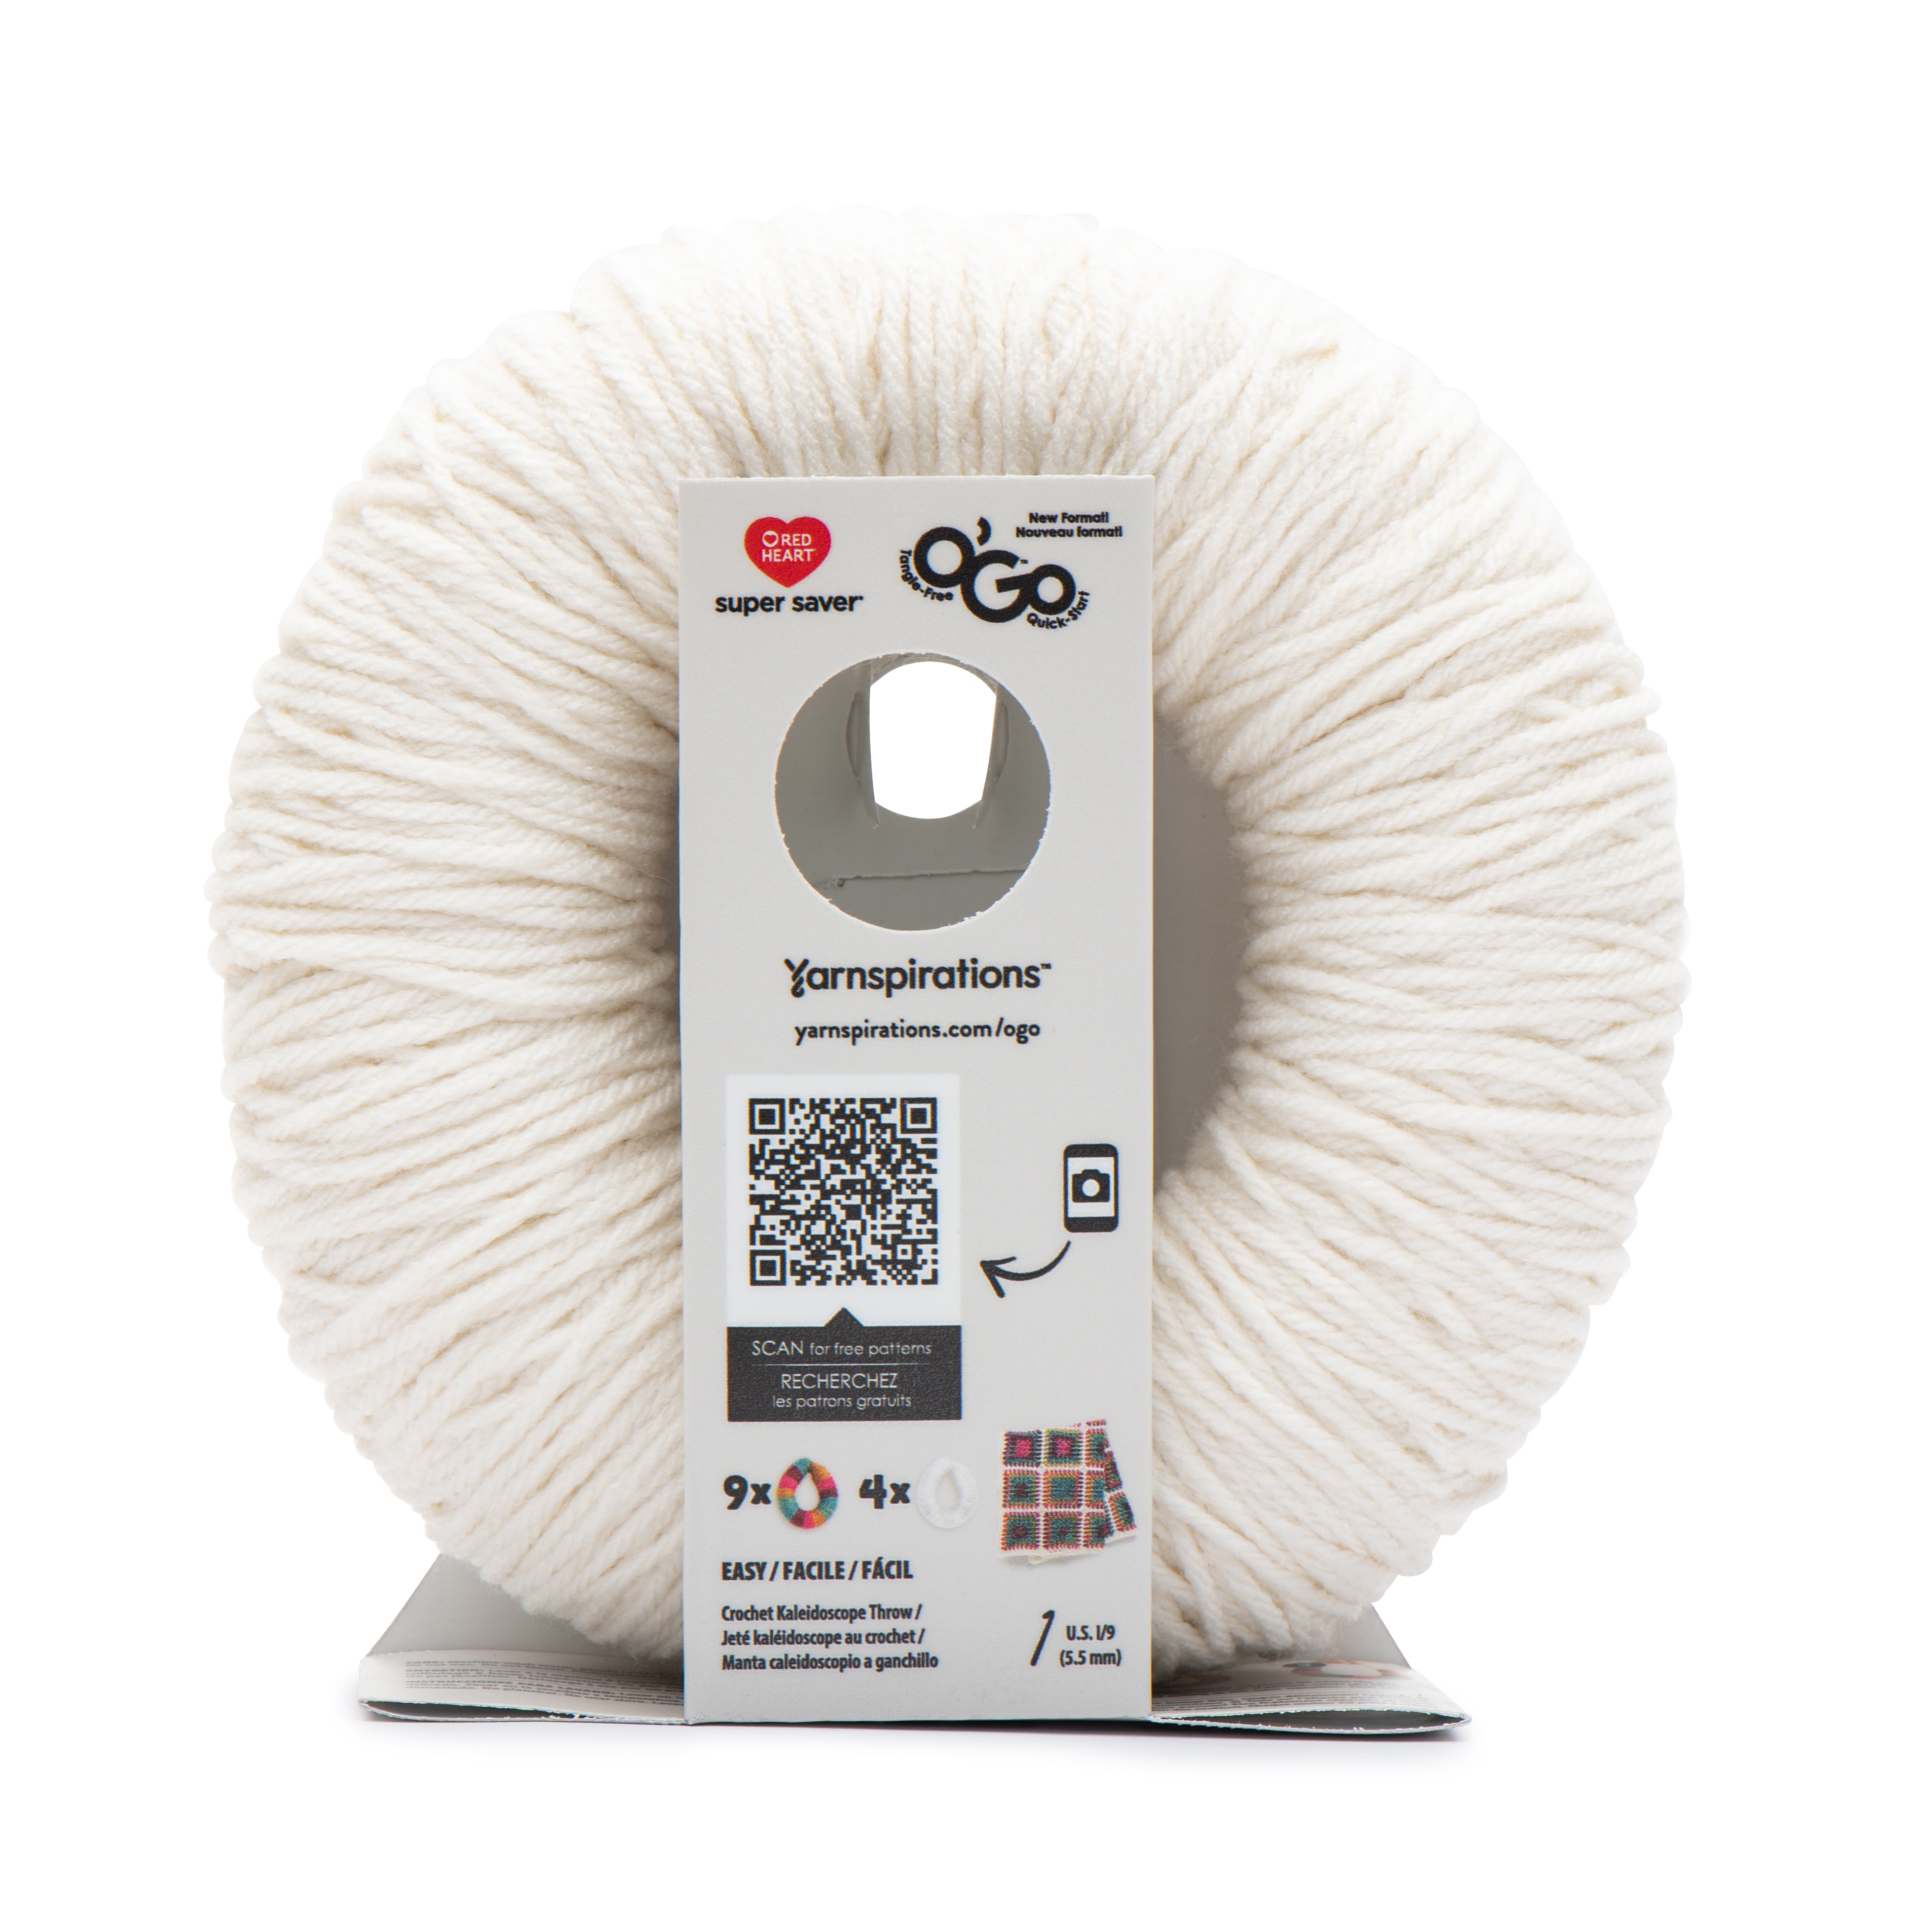 Red Heart® Super Saver Yarn - Light Grey, 7 oz - Fry's Food Stores